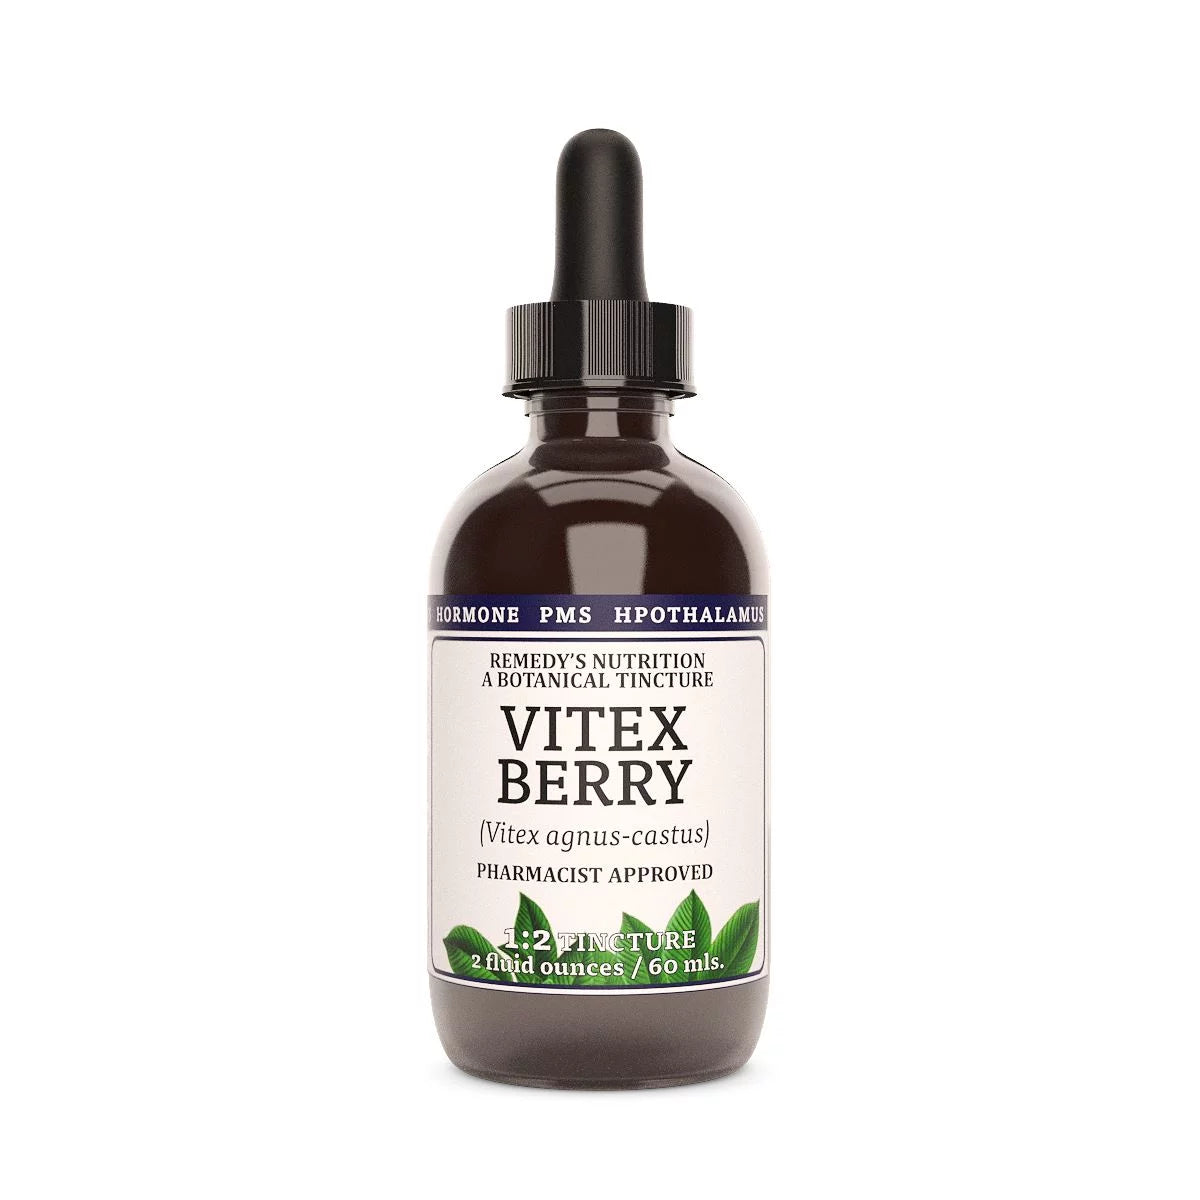 Image of Remedy's Nutrition® Vitex Berry Tincture Herbal Dietary Supplement front bottle. Made in the USA. Vitex agnus-castus